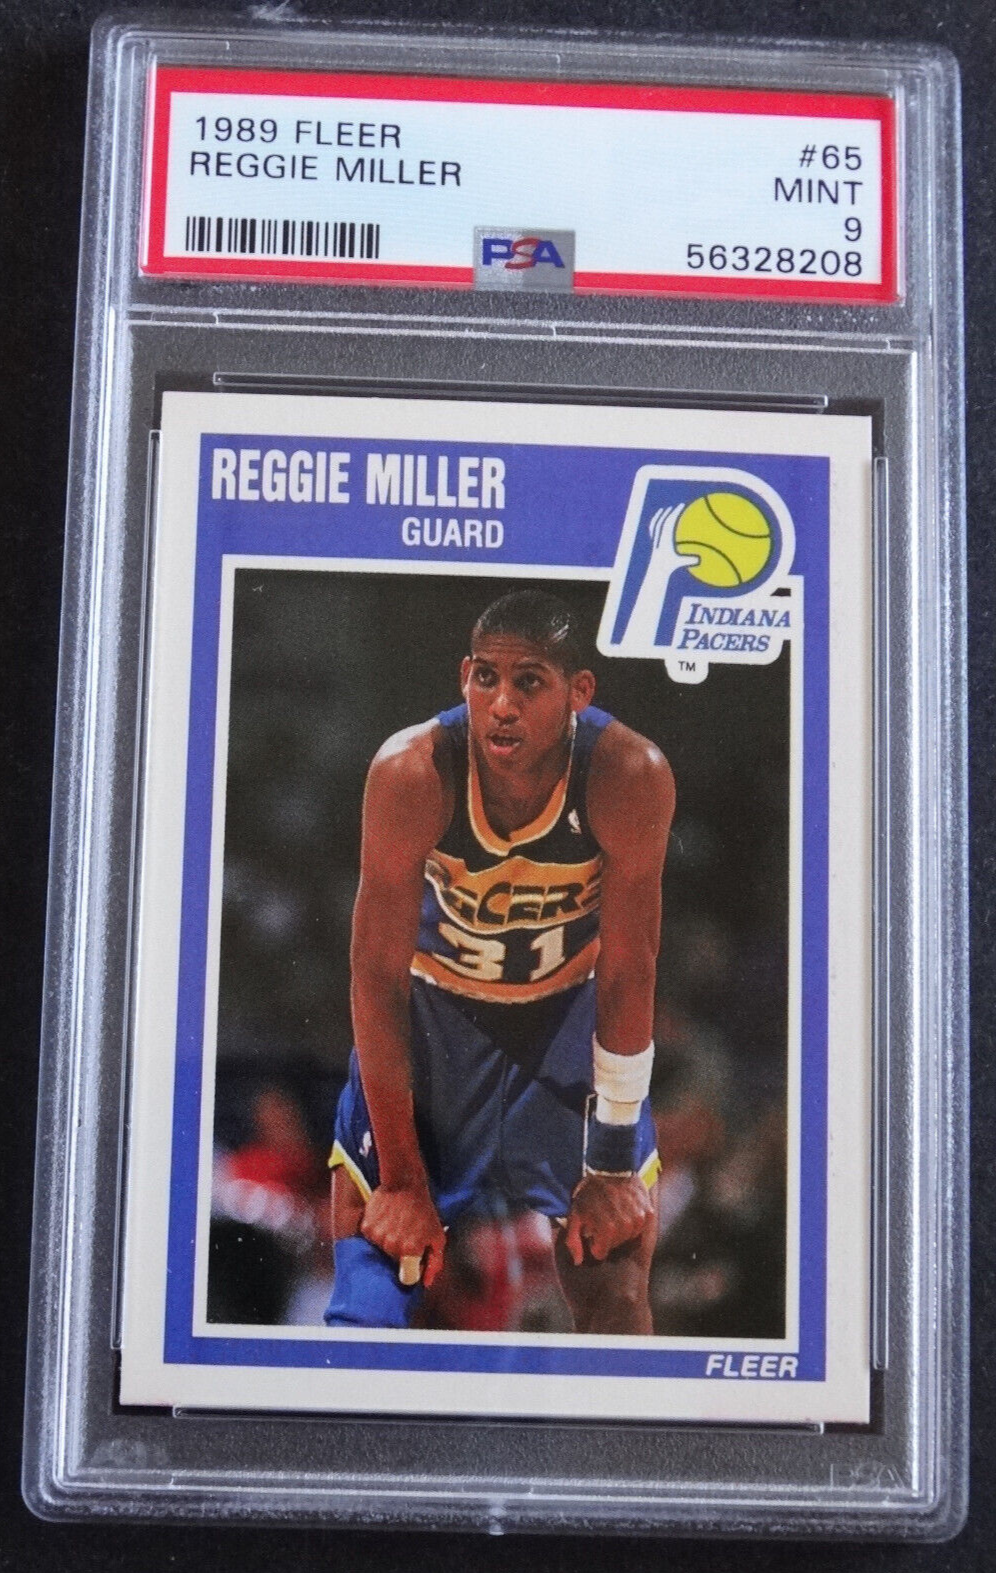 Primary image for 1989 Fleer #65 Reggie Miller Indiana Pacers Basketball Card PSA 9 Mint